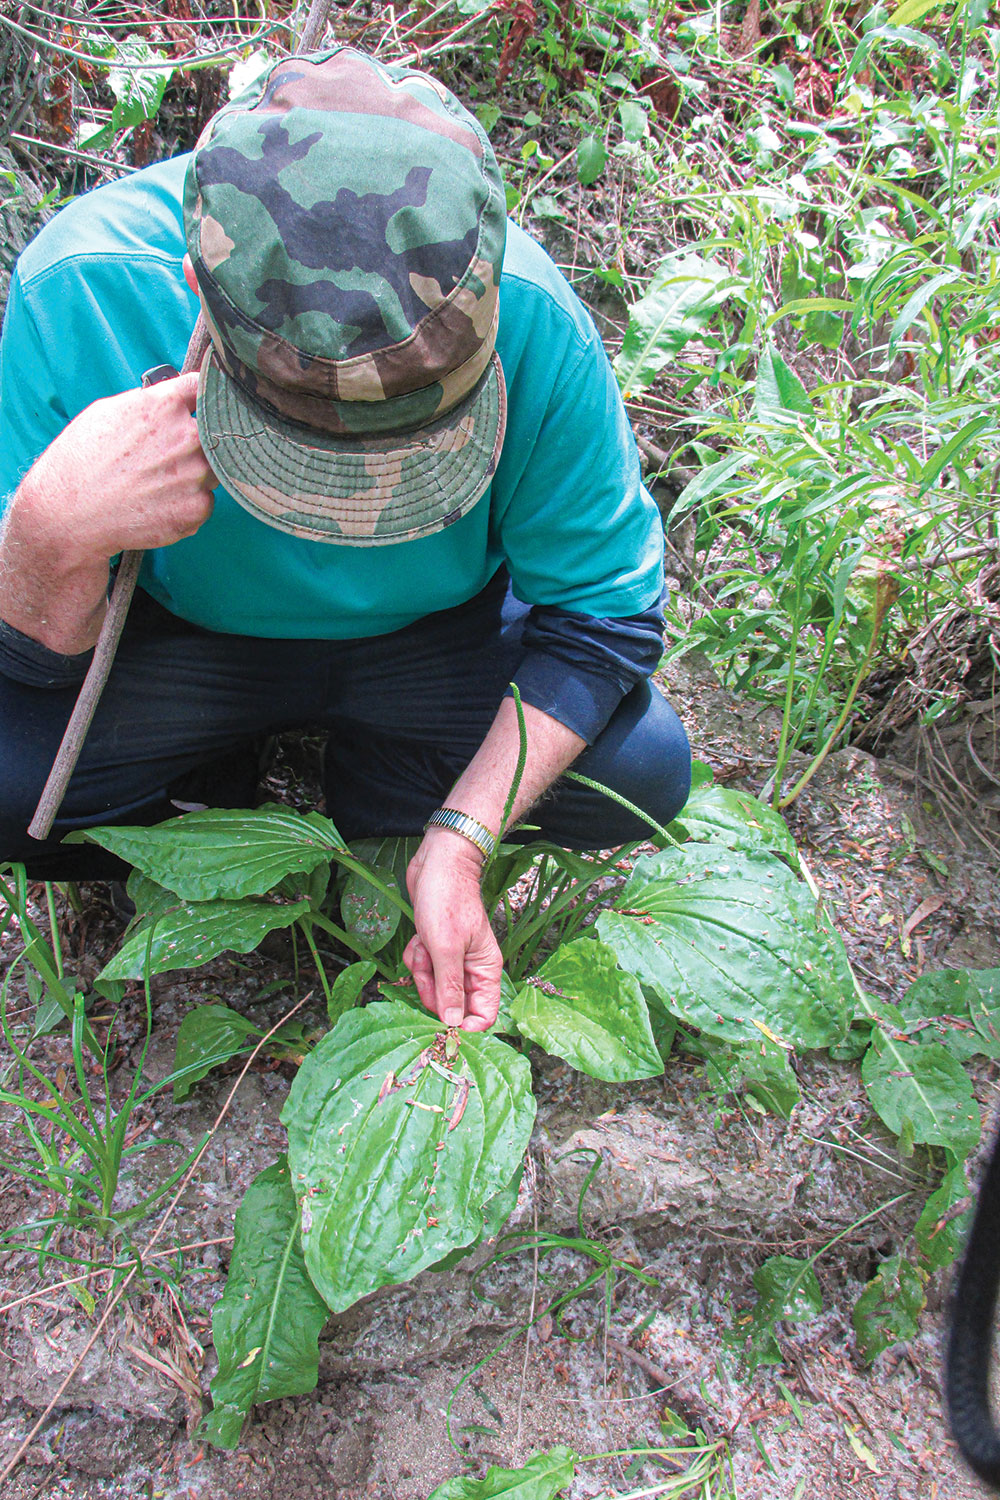 Inspecting a particularly large leaf of an English plantain